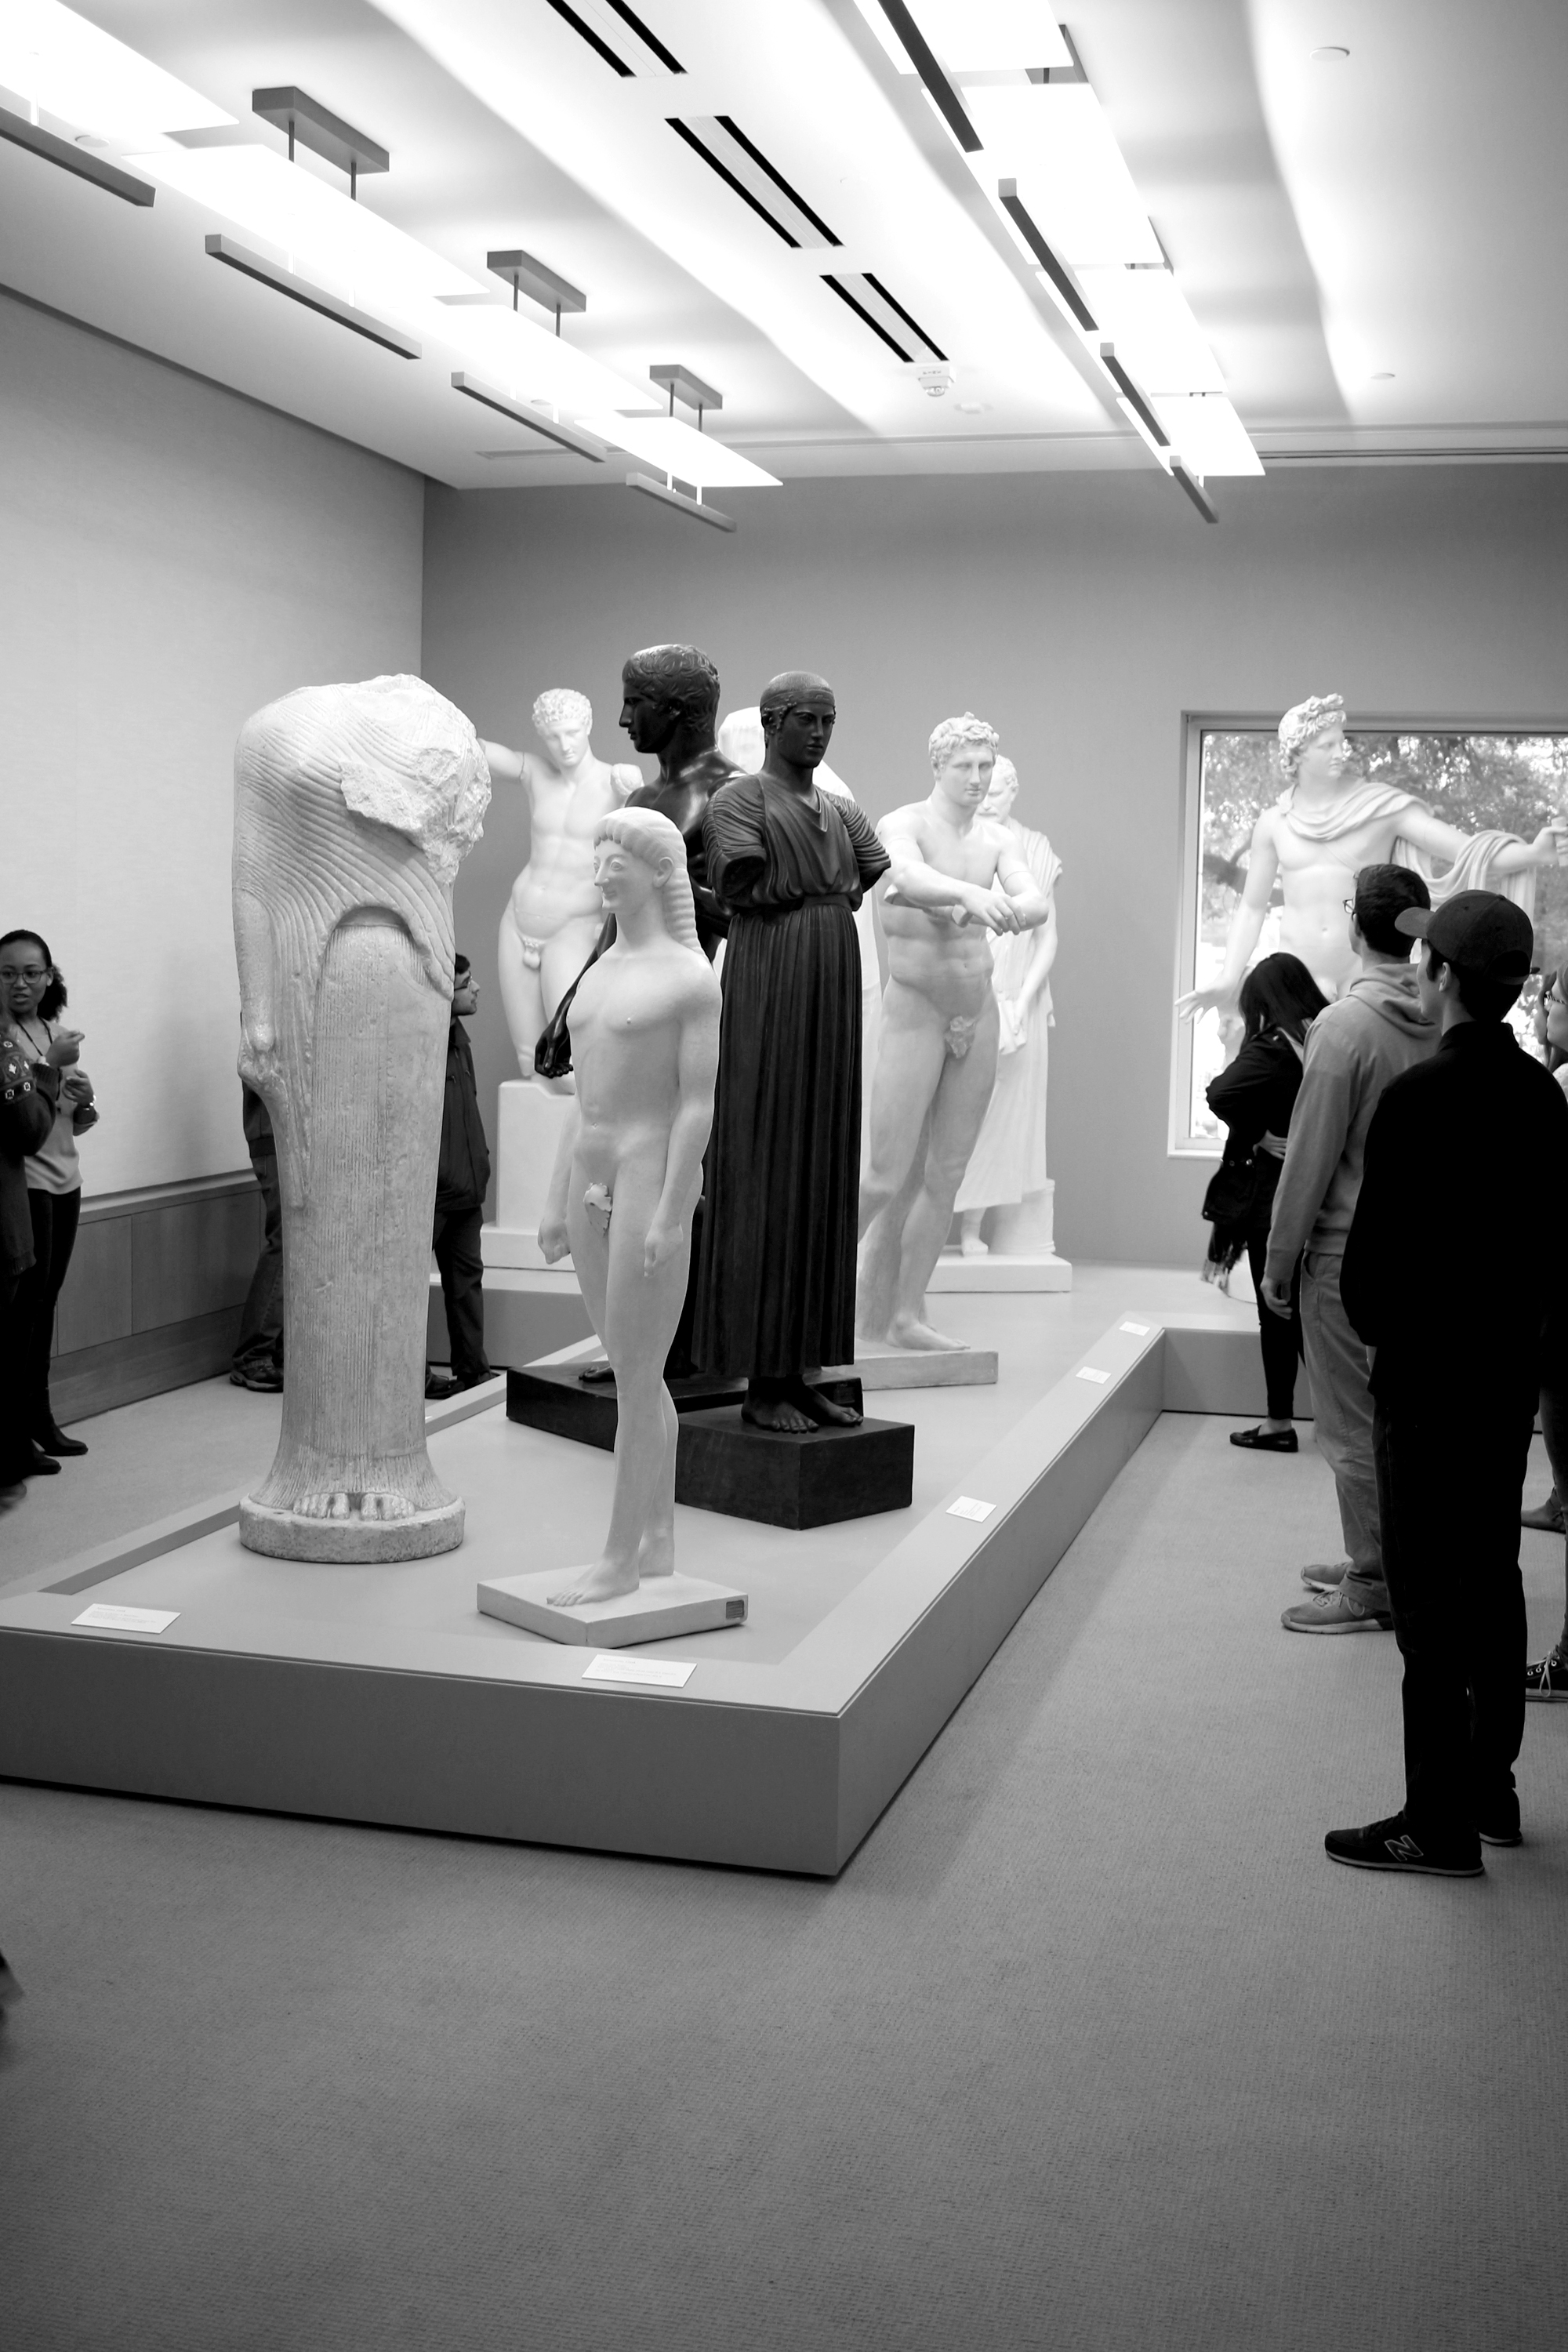 Students in a Greek Archaeology class visit the casts on display in the Osborne Seminar Room